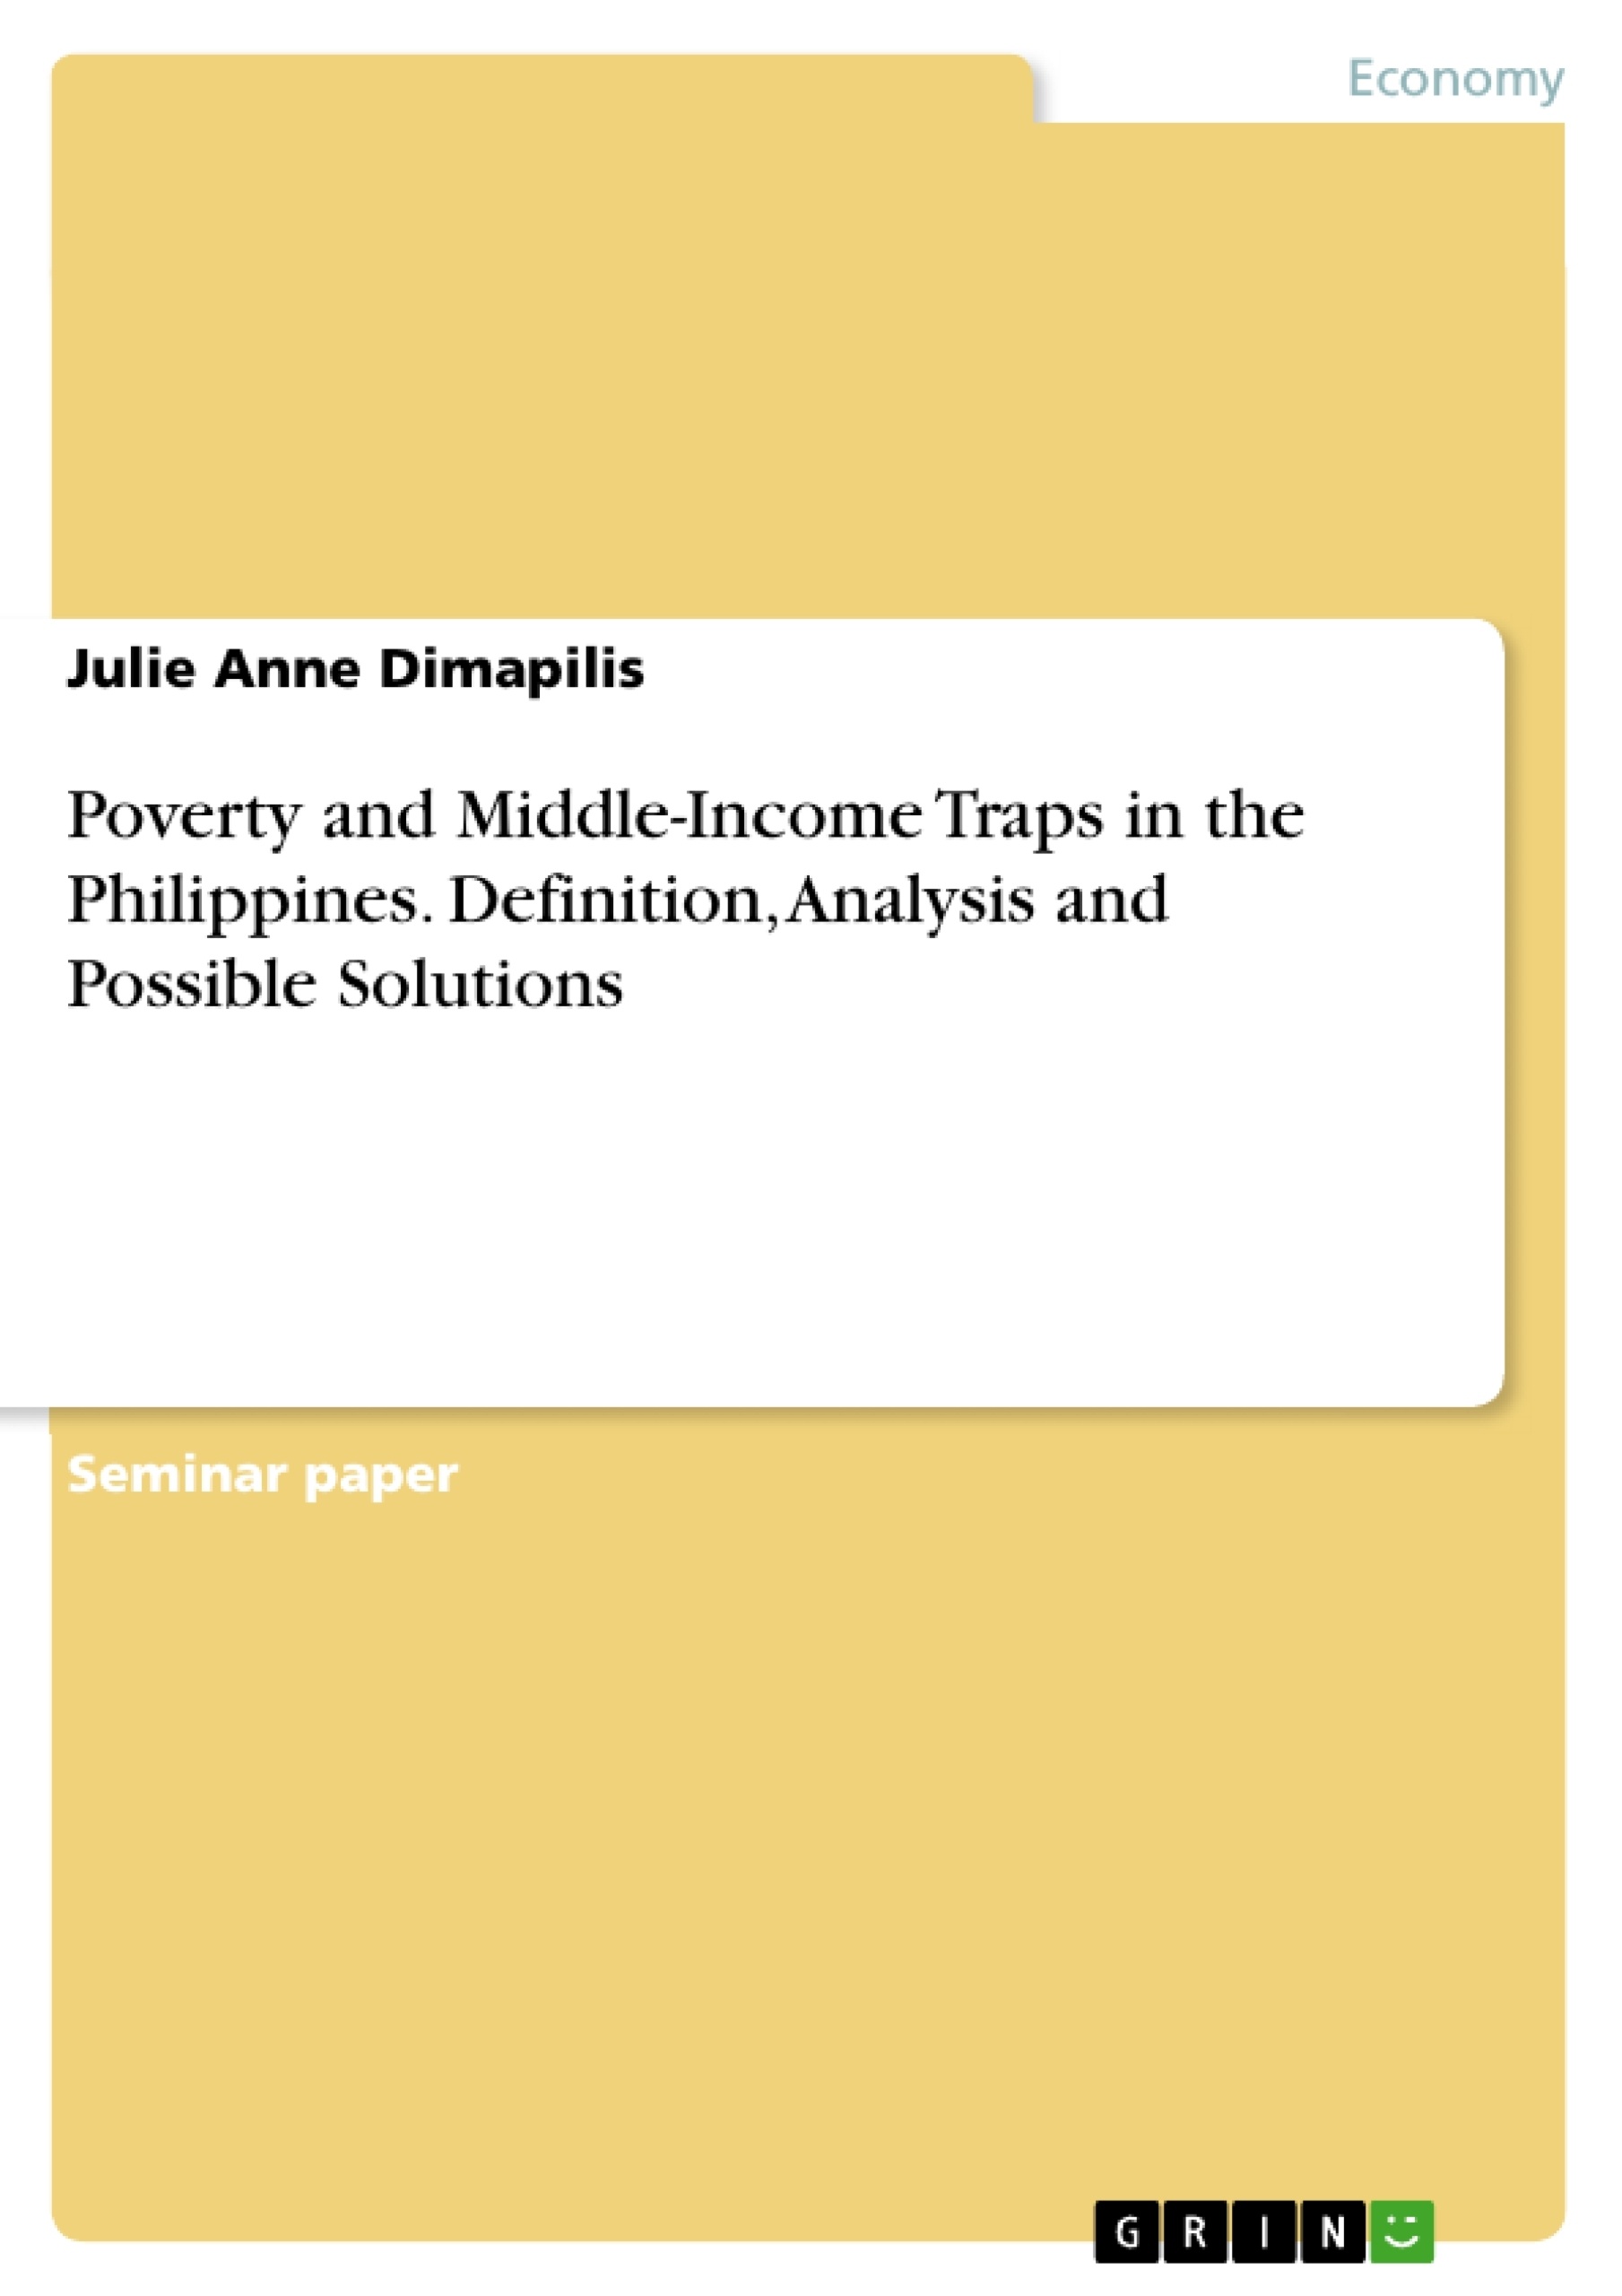 Título: Poverty and Middle-Income Traps in the Philippines. Definition, Analysis and Possible Solutions